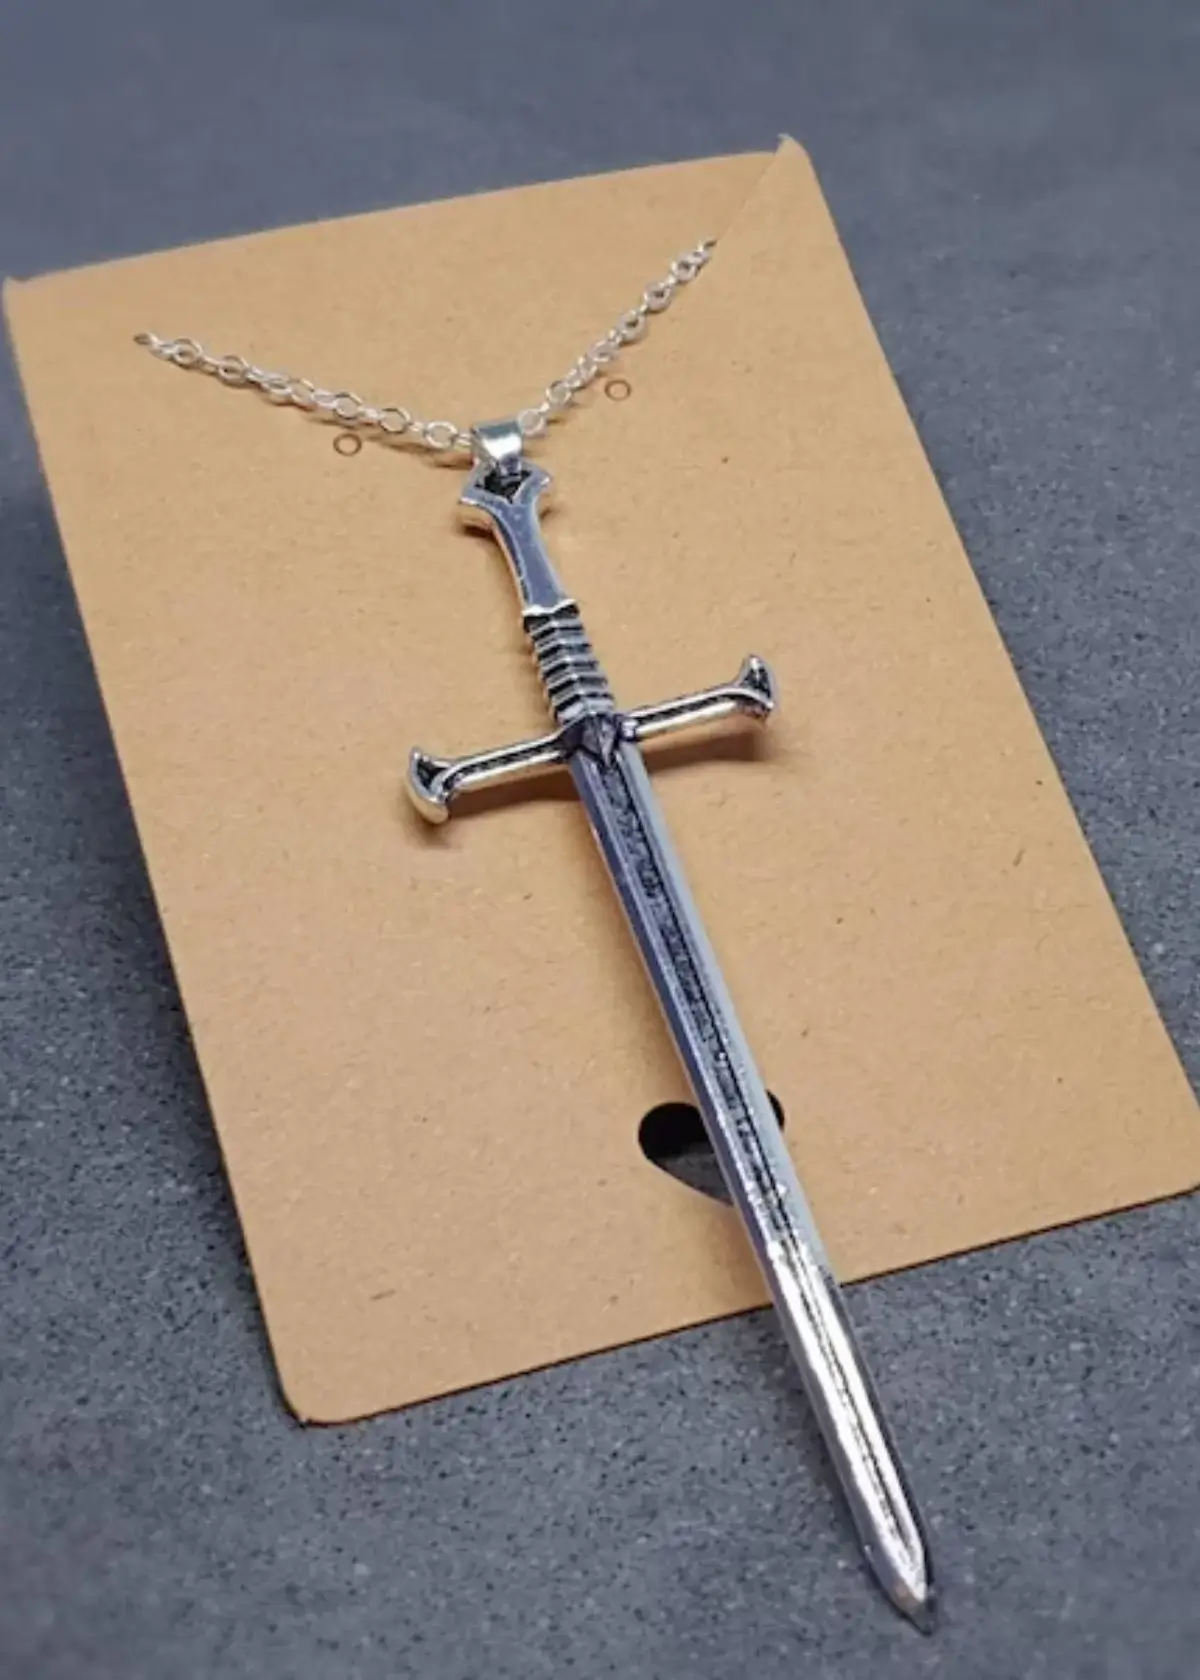 What is a dagger necklace?